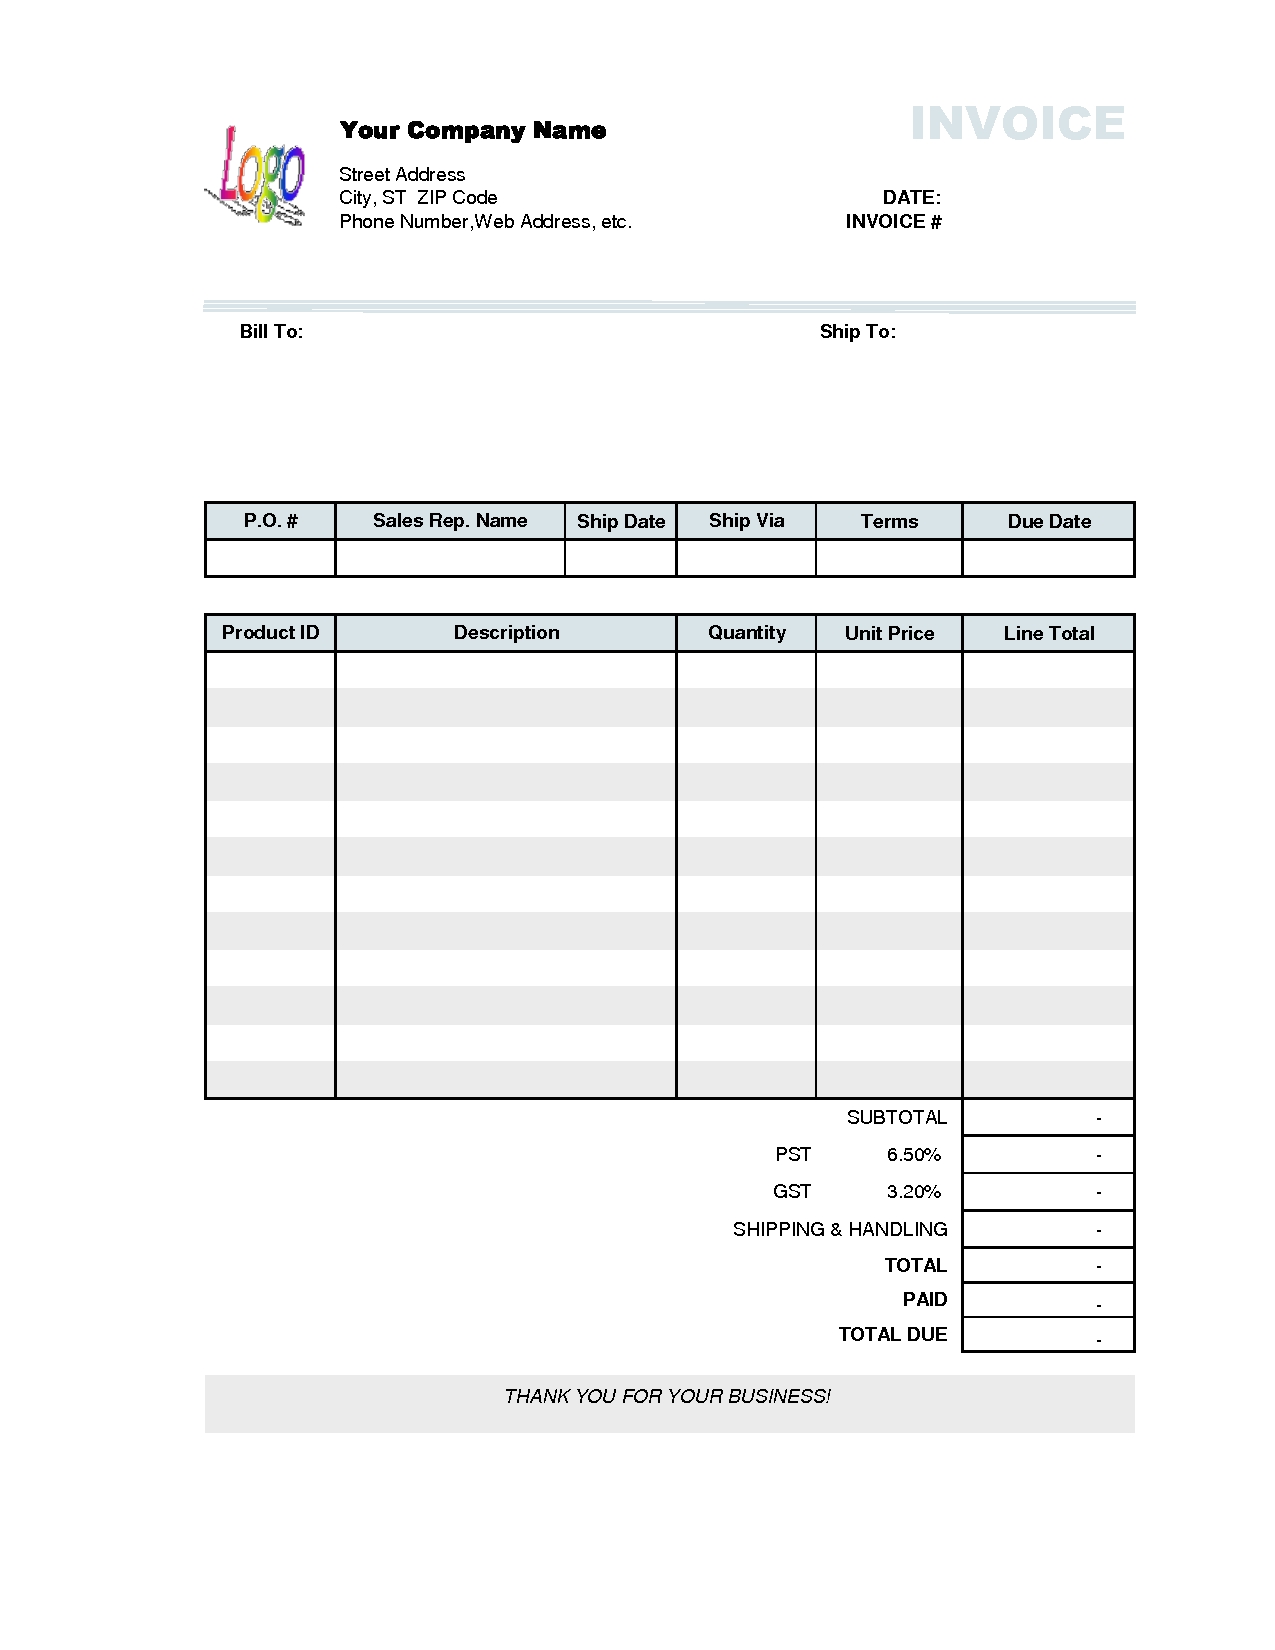 free business receipt templates free business invoice templates small business invoice template free